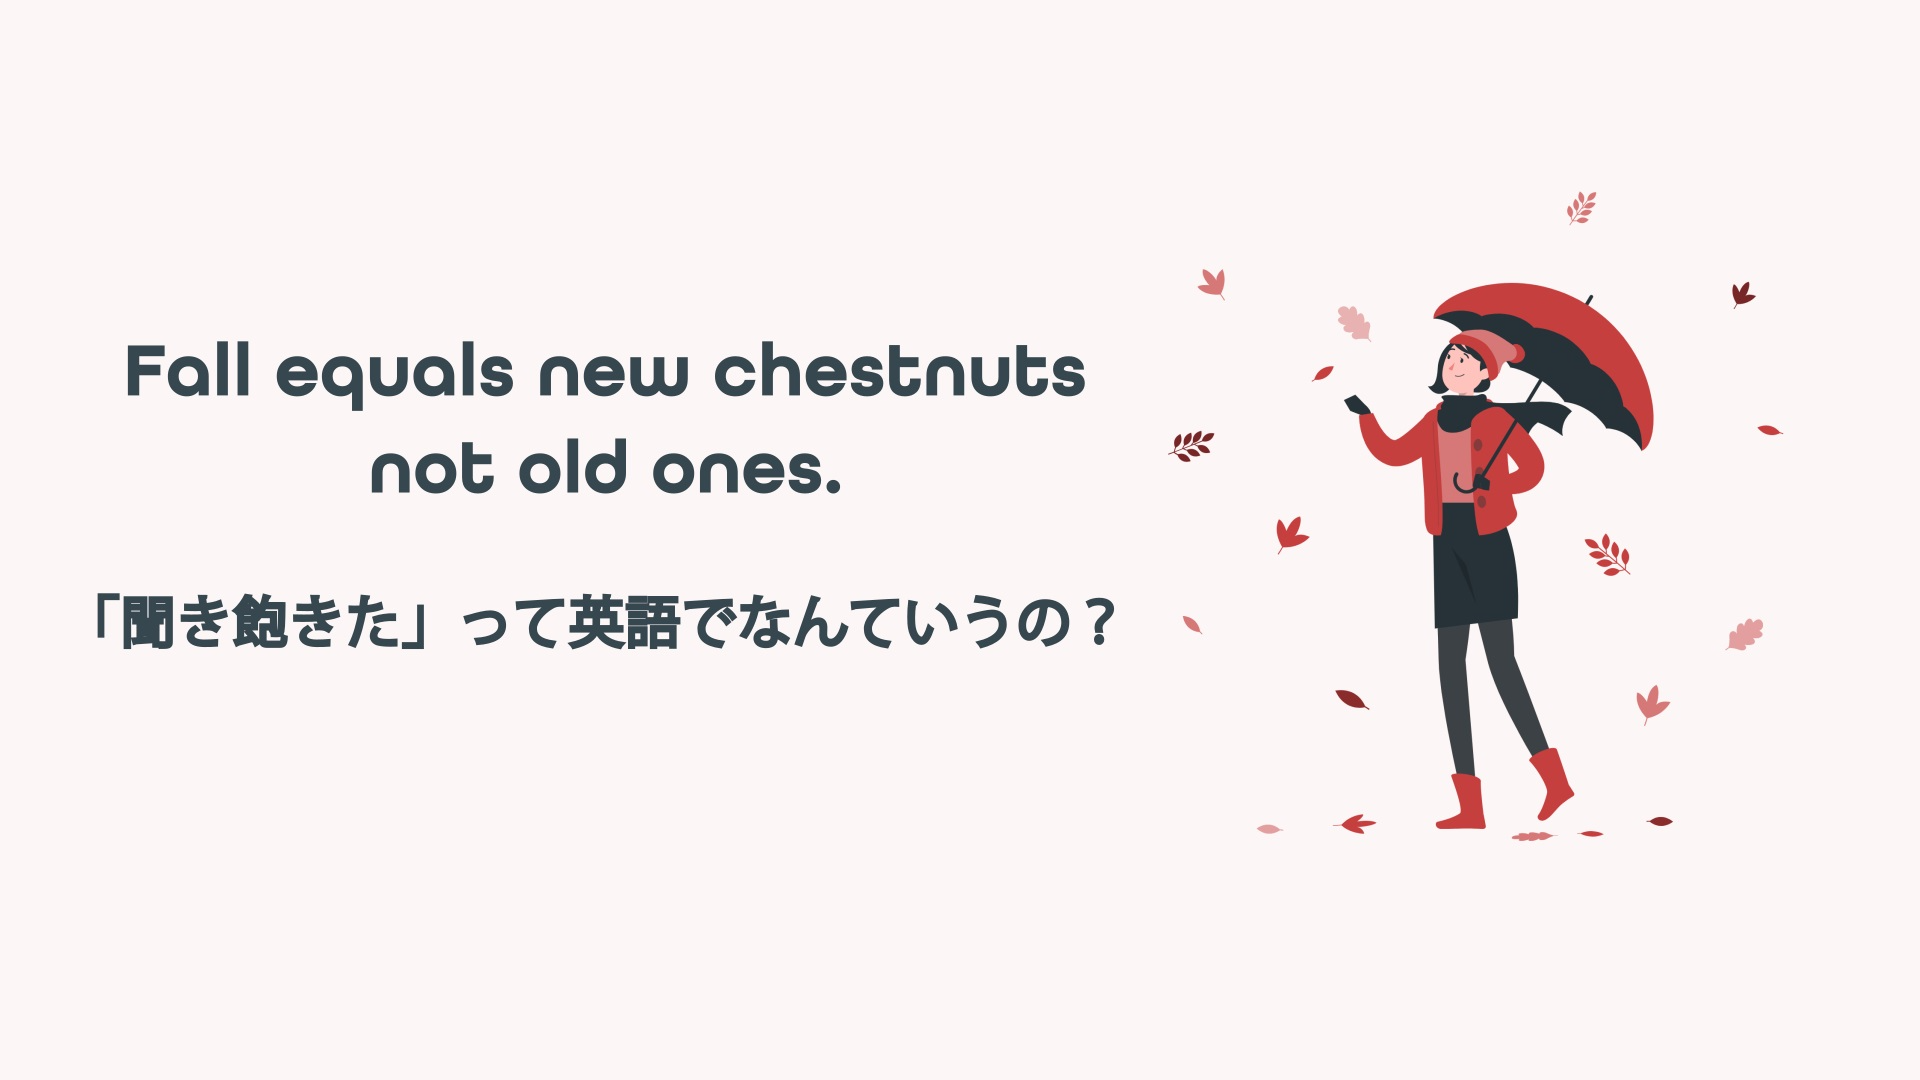 Featured image for “Fall equals new chestnuts not old ones. 「聞き飽きた」って英語でなんていうの？”